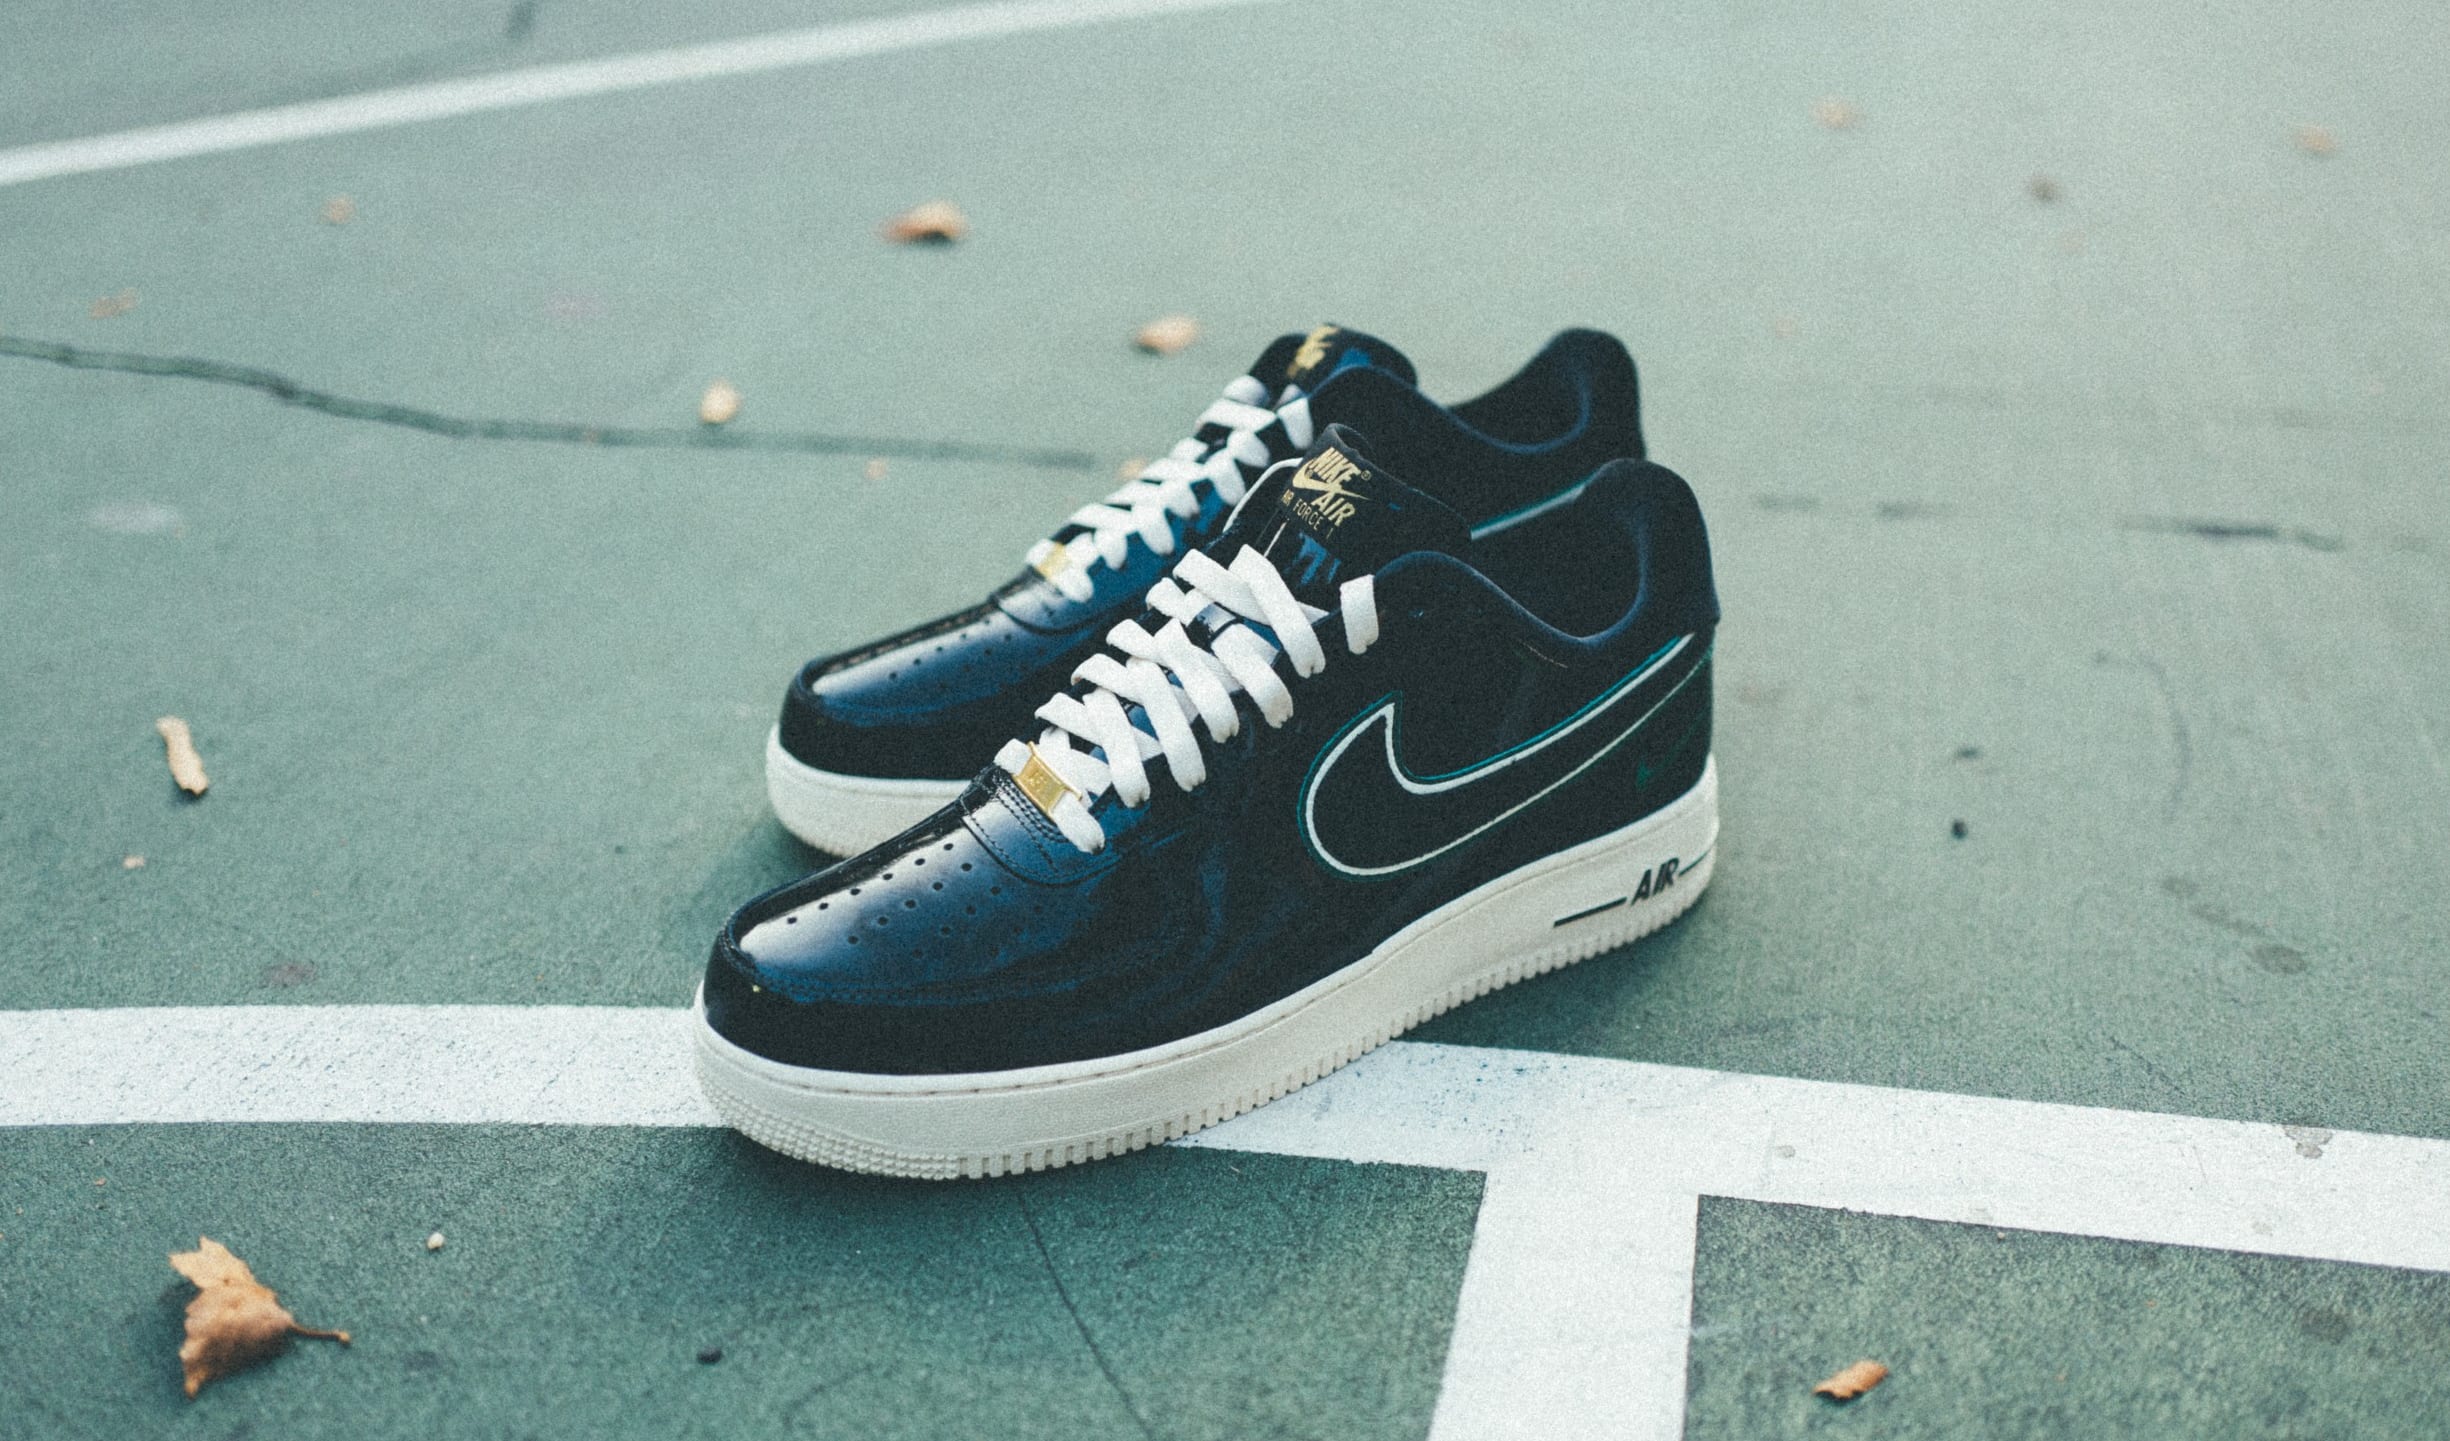 You Can Customize The Nike AF1 With 